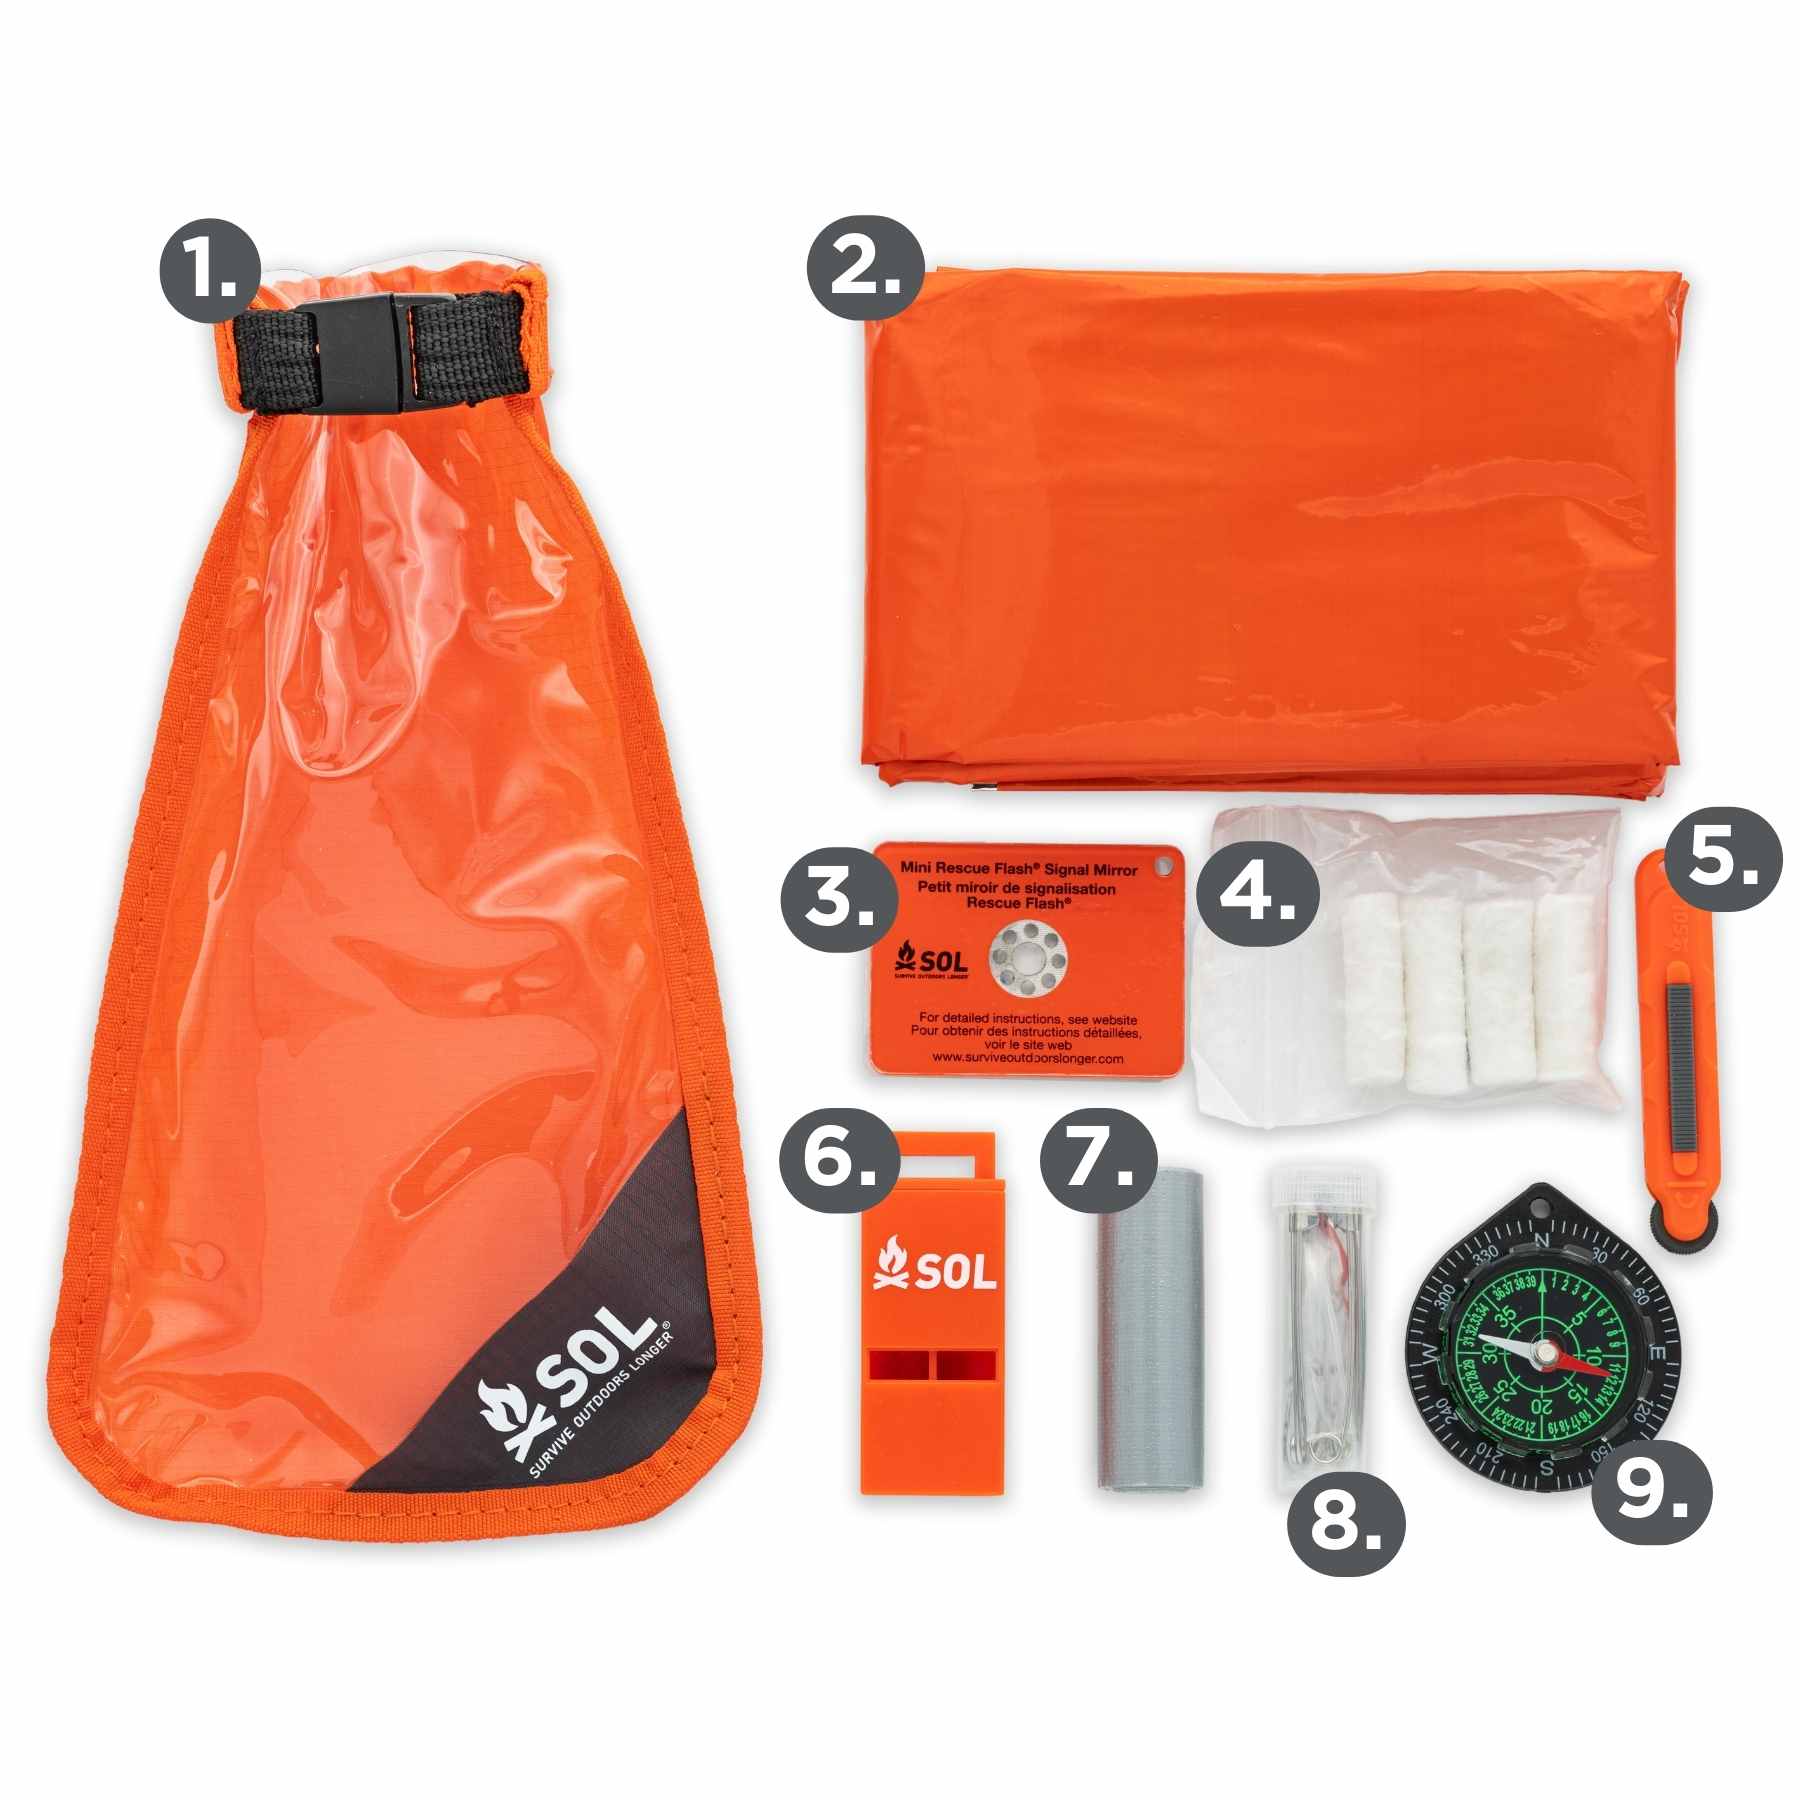 Military Gear Bugout Bag Survival Kit Camping Safety & Survival Equipment |  eBay